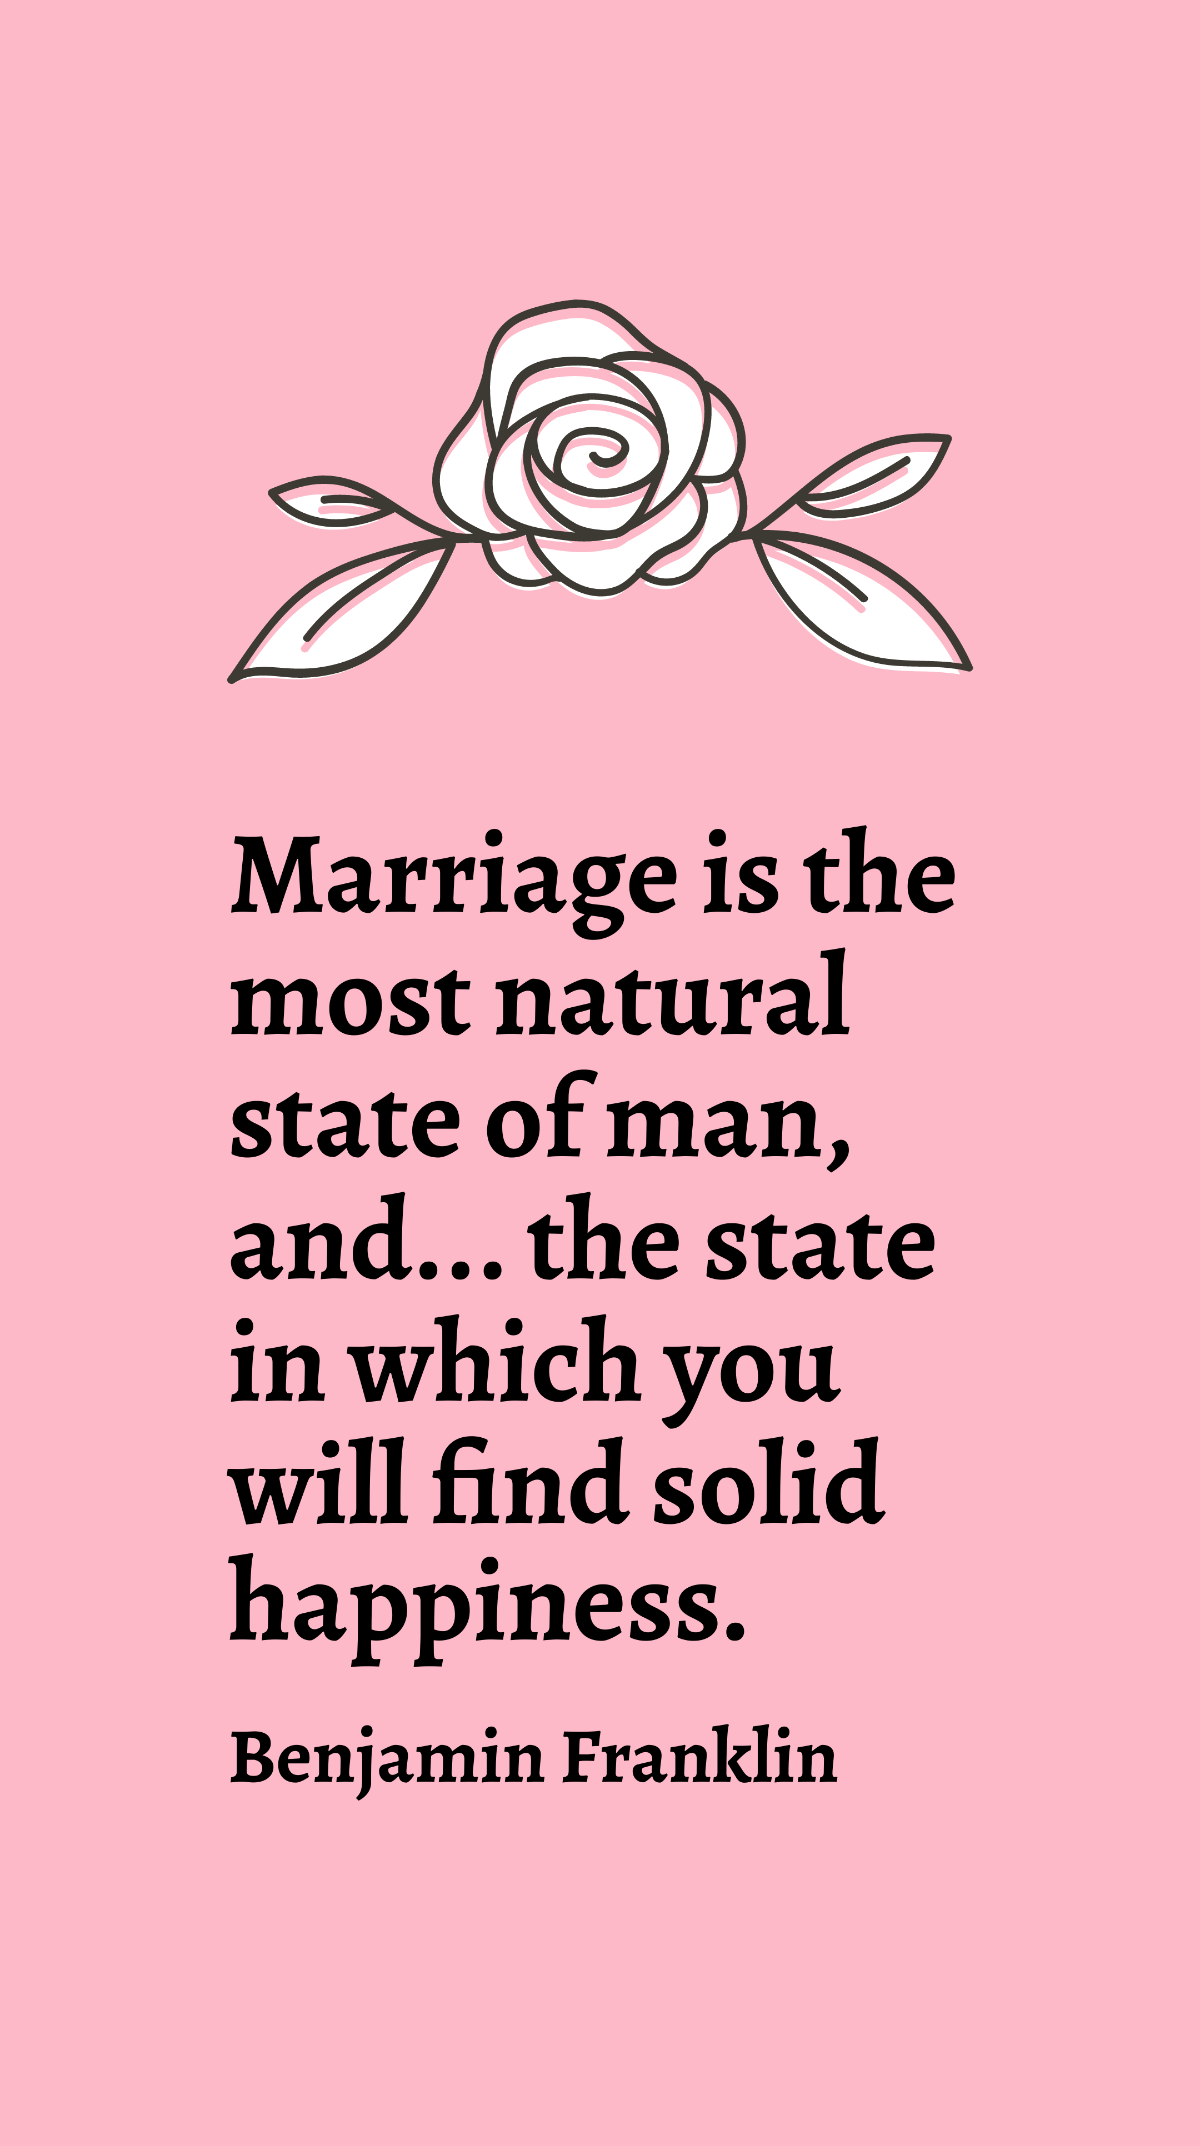 Benjamin Franklin - Marriage is the most natural state of man, and... the state in which you will find solid happiness. Template